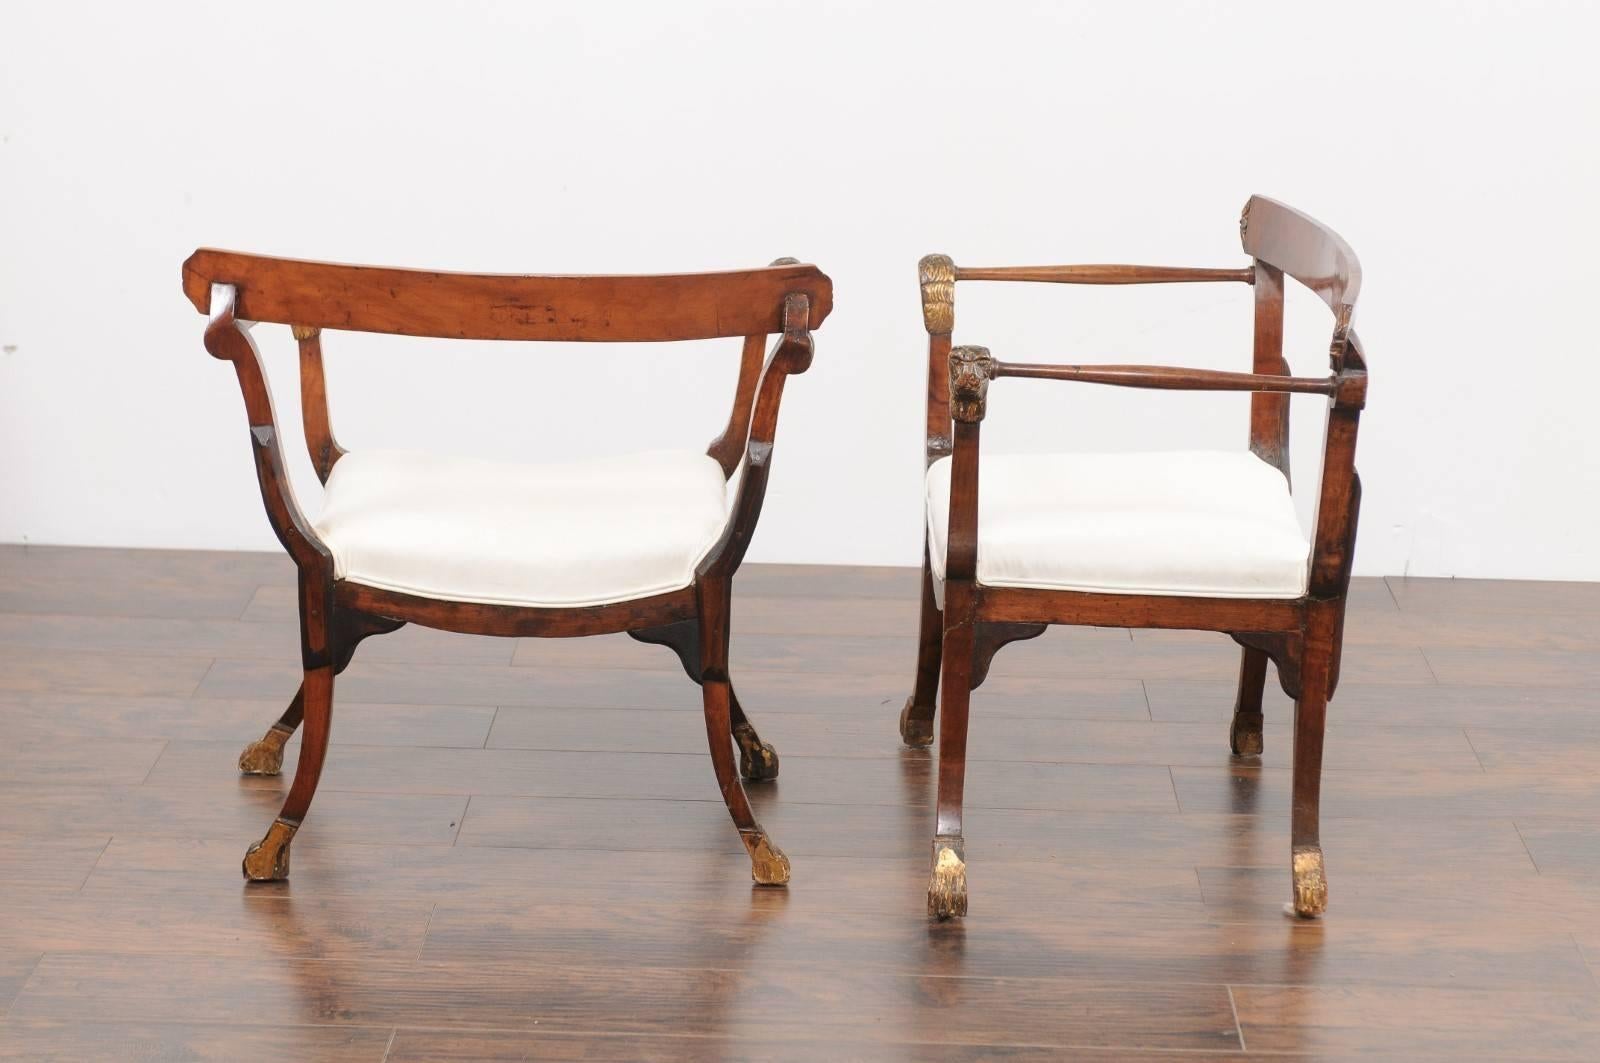 Pair of 18th Century Italian Upholstered Seat Walnut Chairs with Lion Details 3